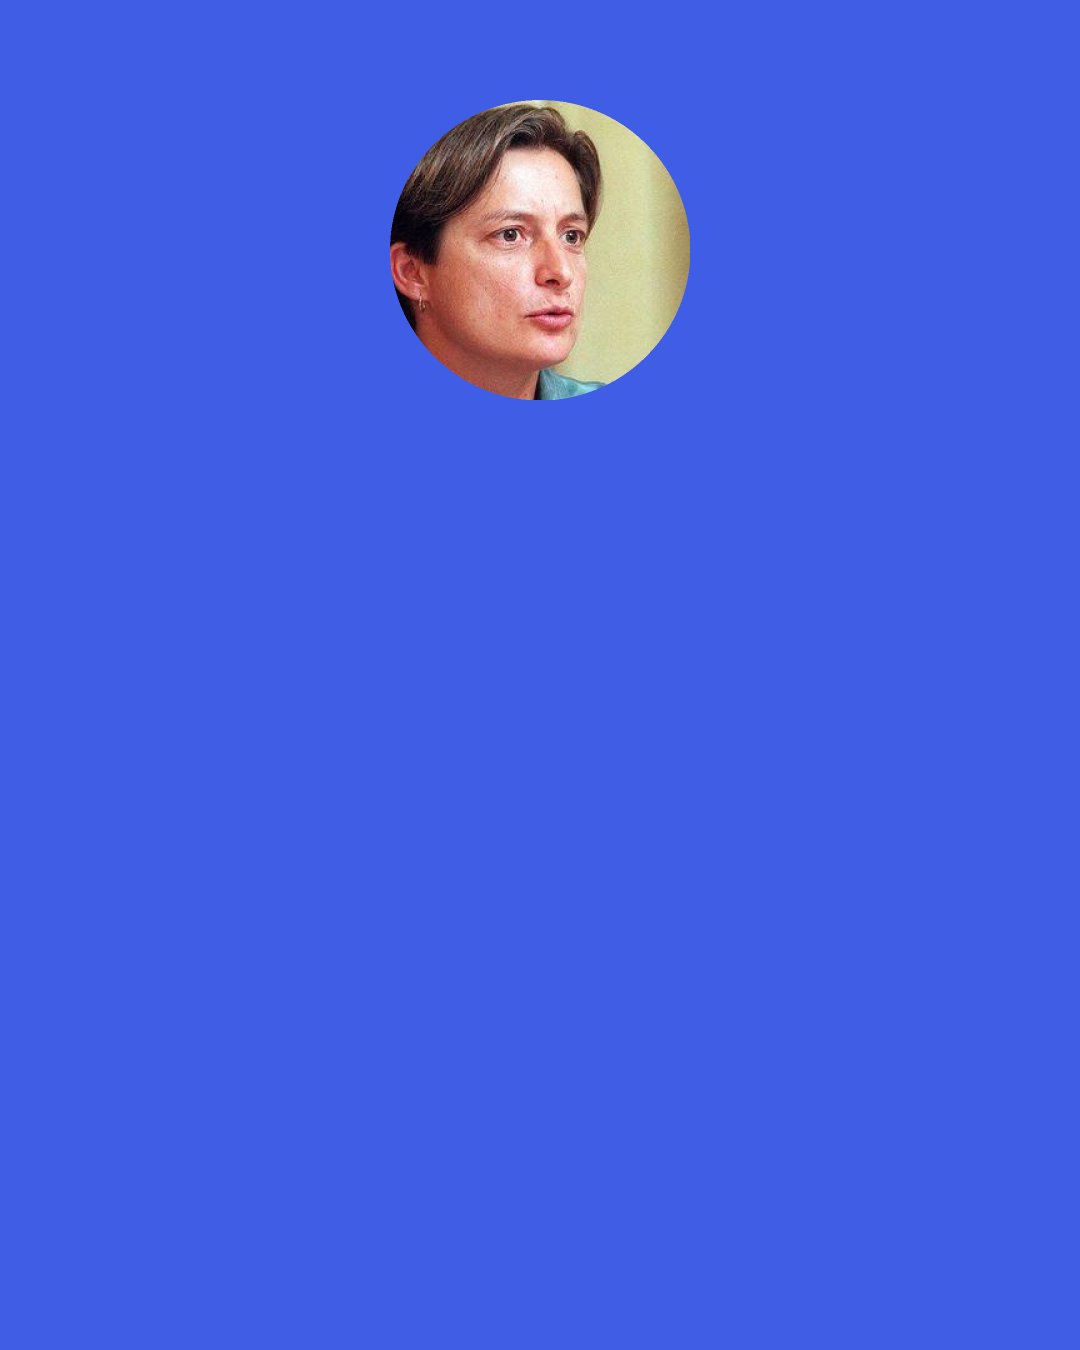 Judith Butler: Maybe we need to start with the rethinking of what is "west" and what is "non-west." It seems to me that there are any number of populations who already cross that divide, and we could probably point to several existing states that belong exclusively neither to one category nor to the other. Do we use these terms to designate geographical realities, geopolitical ones, or perhaps sites of power, exploitation, orientalism that move through space and time in ways that have to be tracked historically.